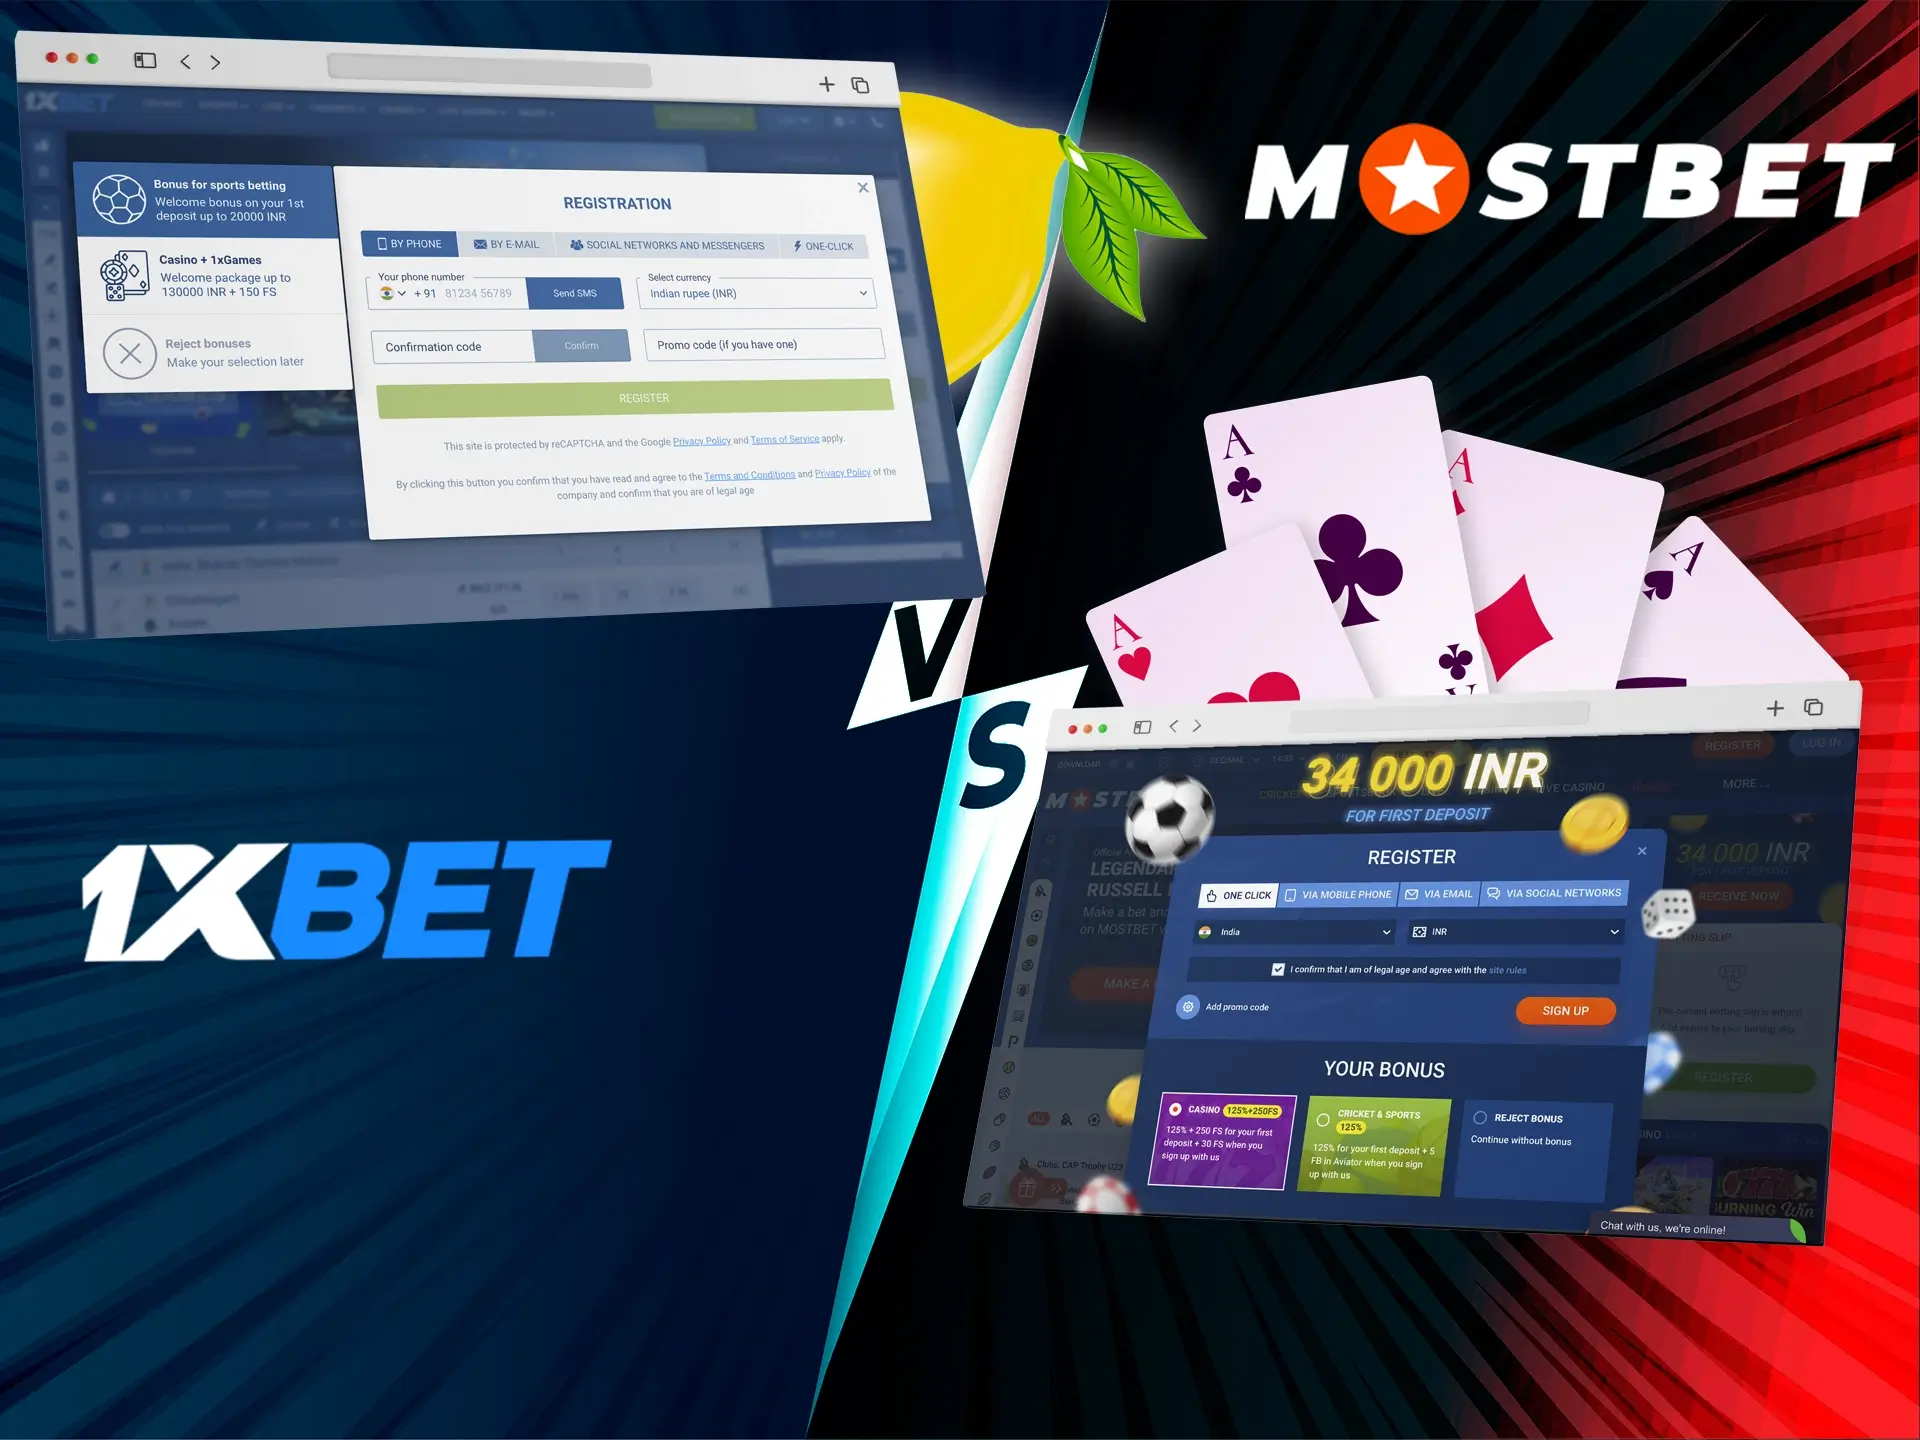 Sign up and play with 1xbet or Mostbet.